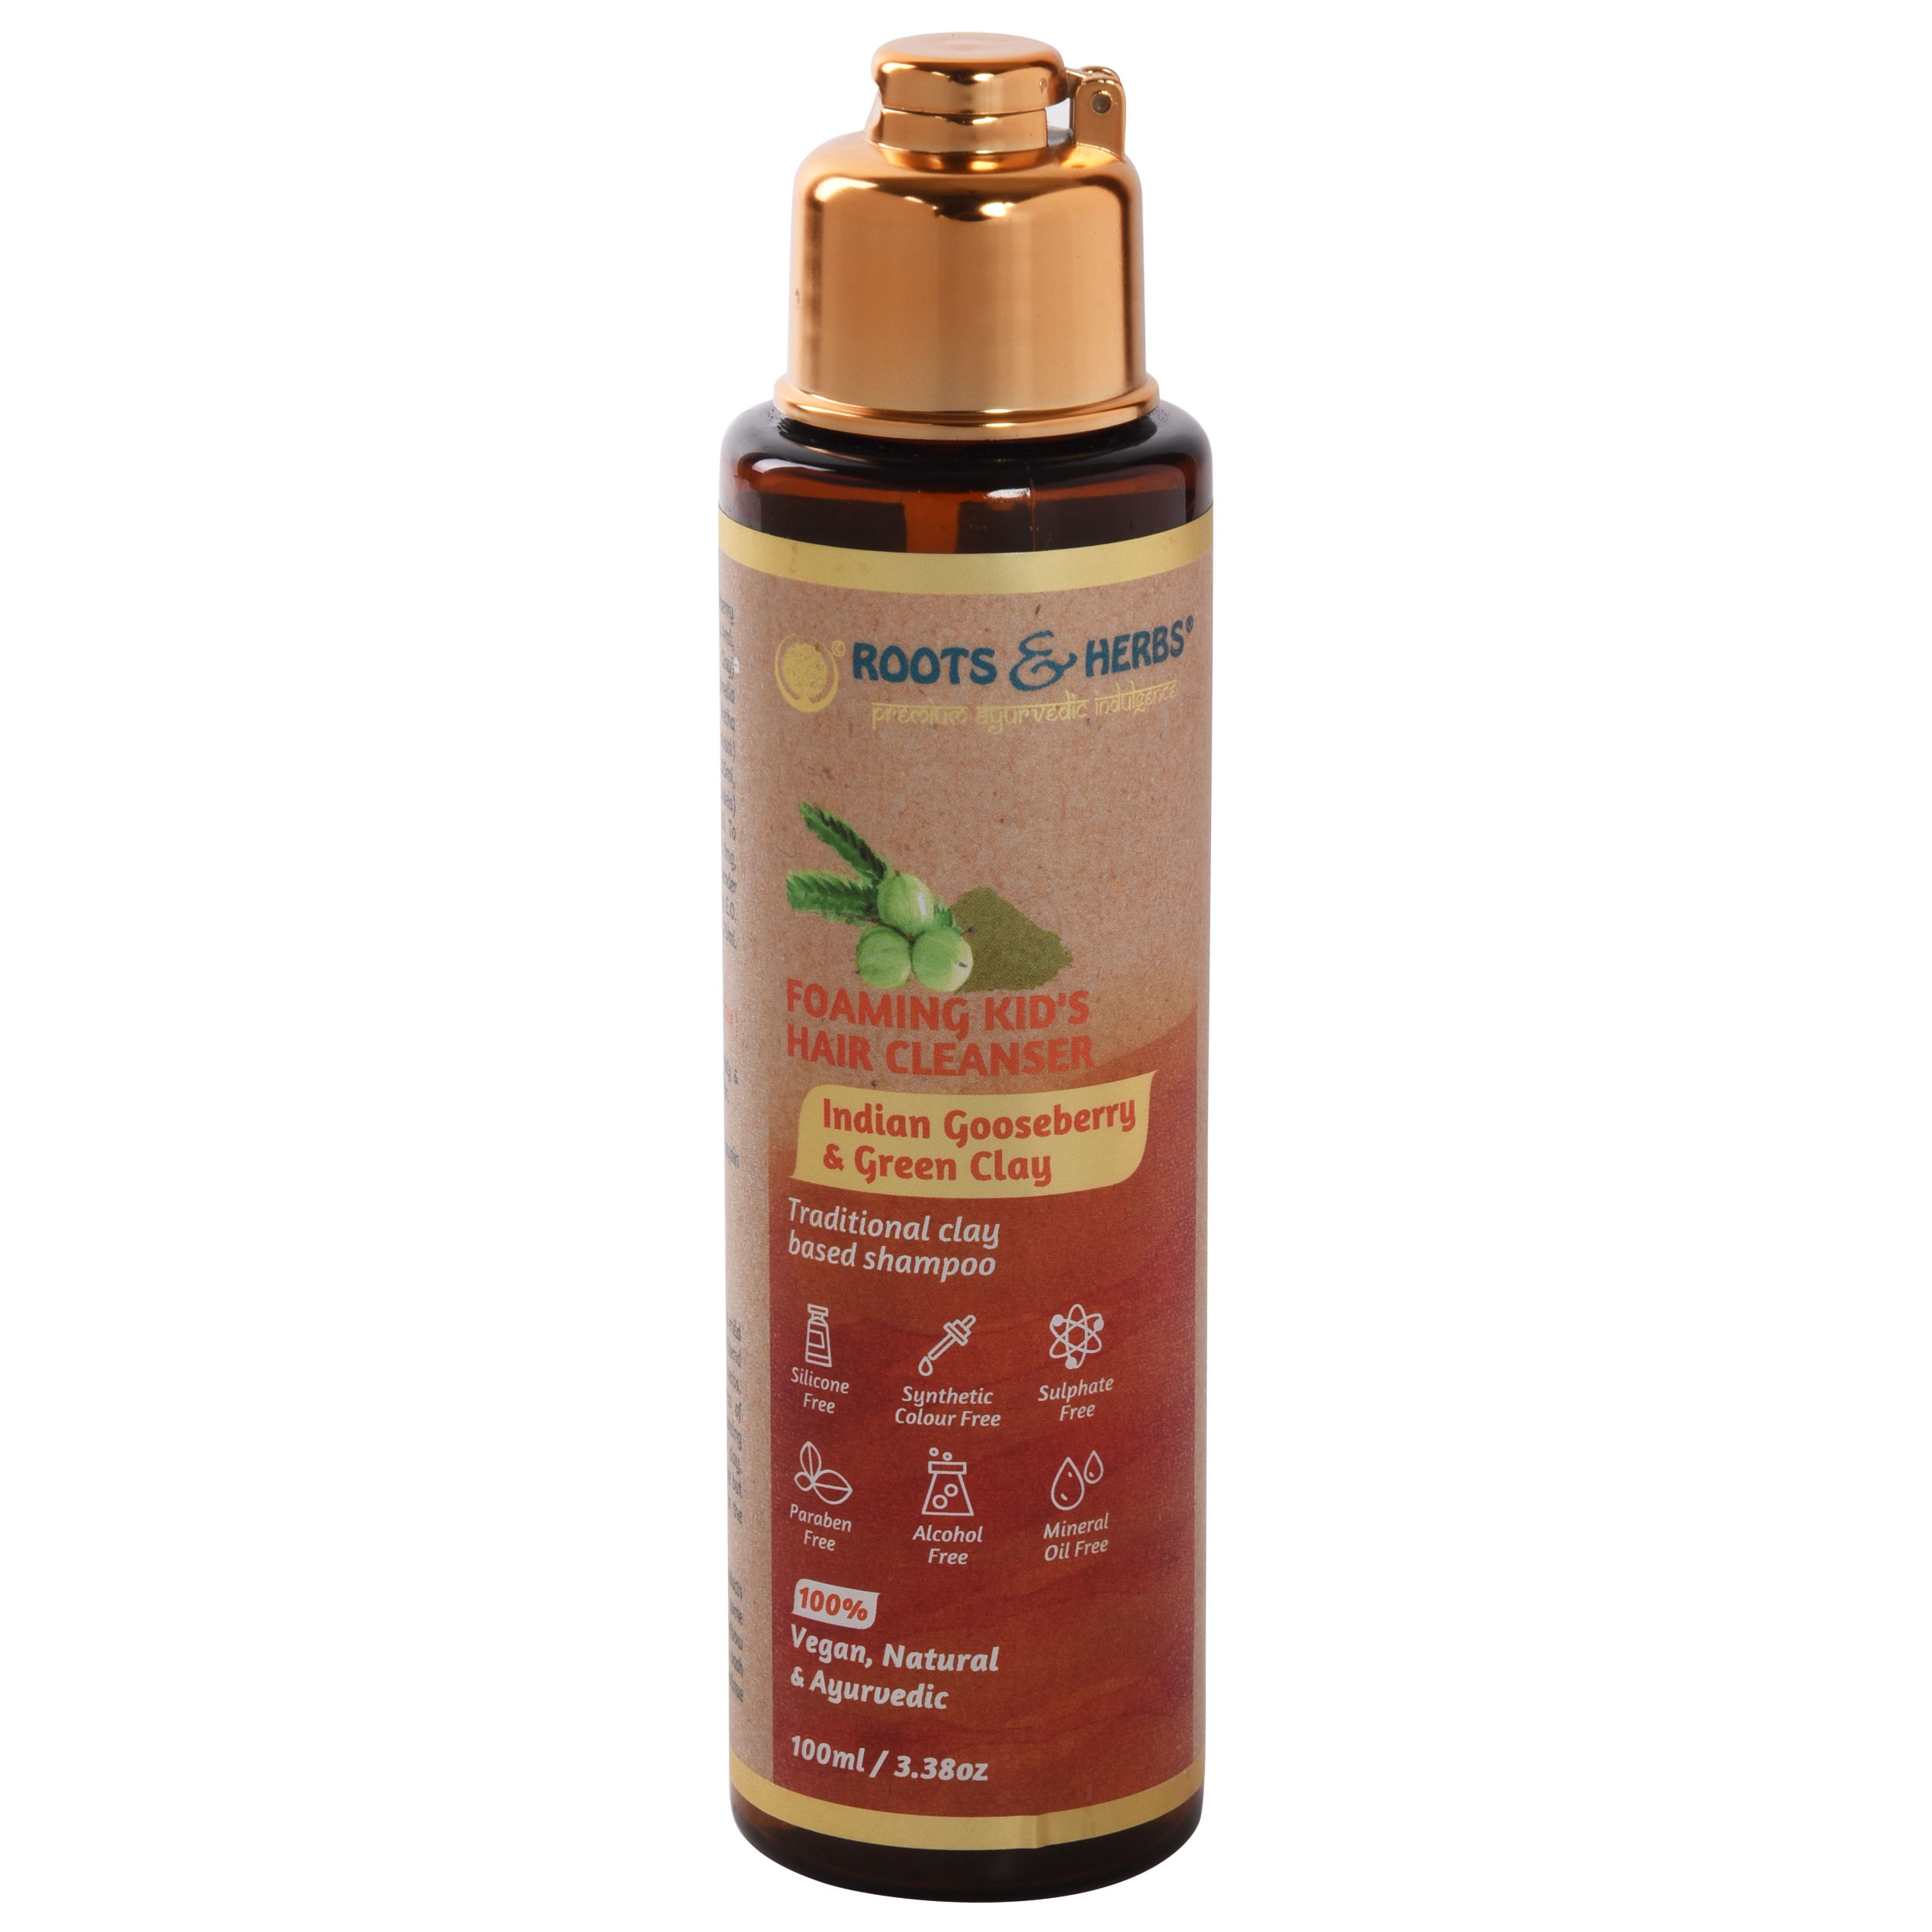 Roots & Herbs Indian Gooseberry & Green Clay Foaming Kids Hair Cleanser